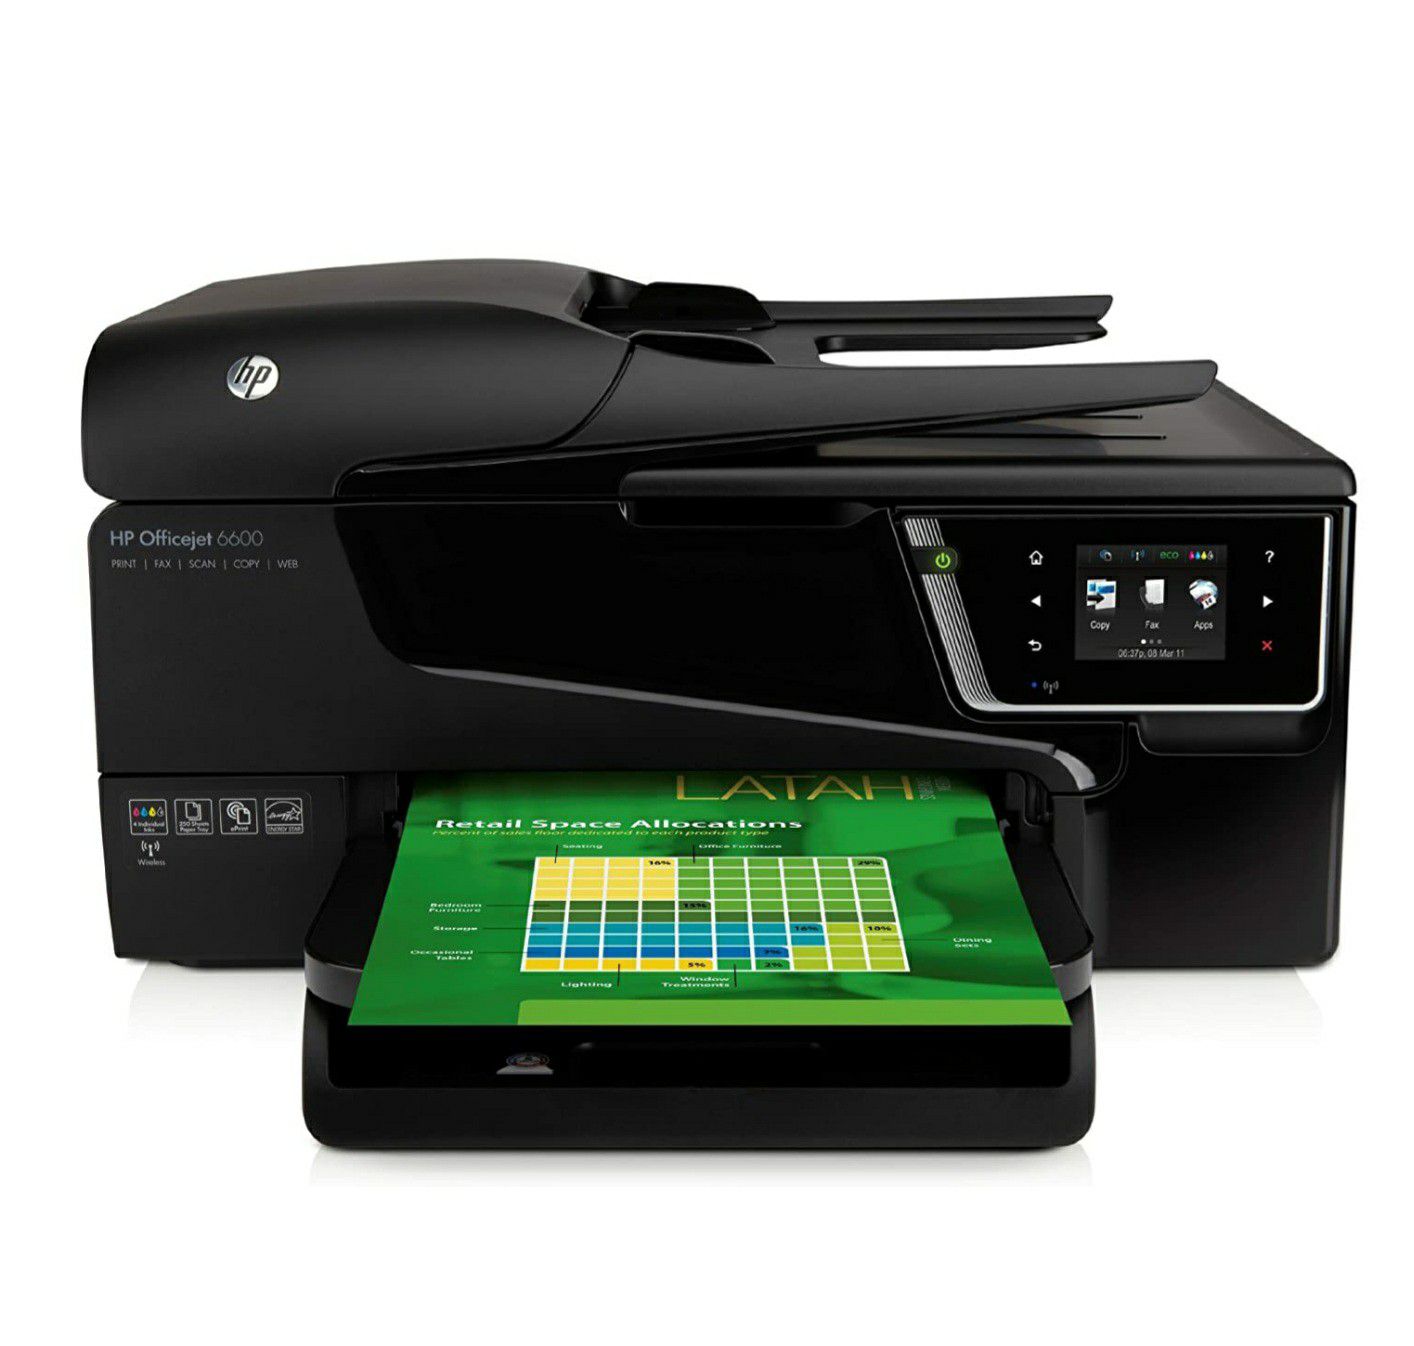 HP Officejet 6600 e-All-in-One Printer series - H711. Market value $724.99